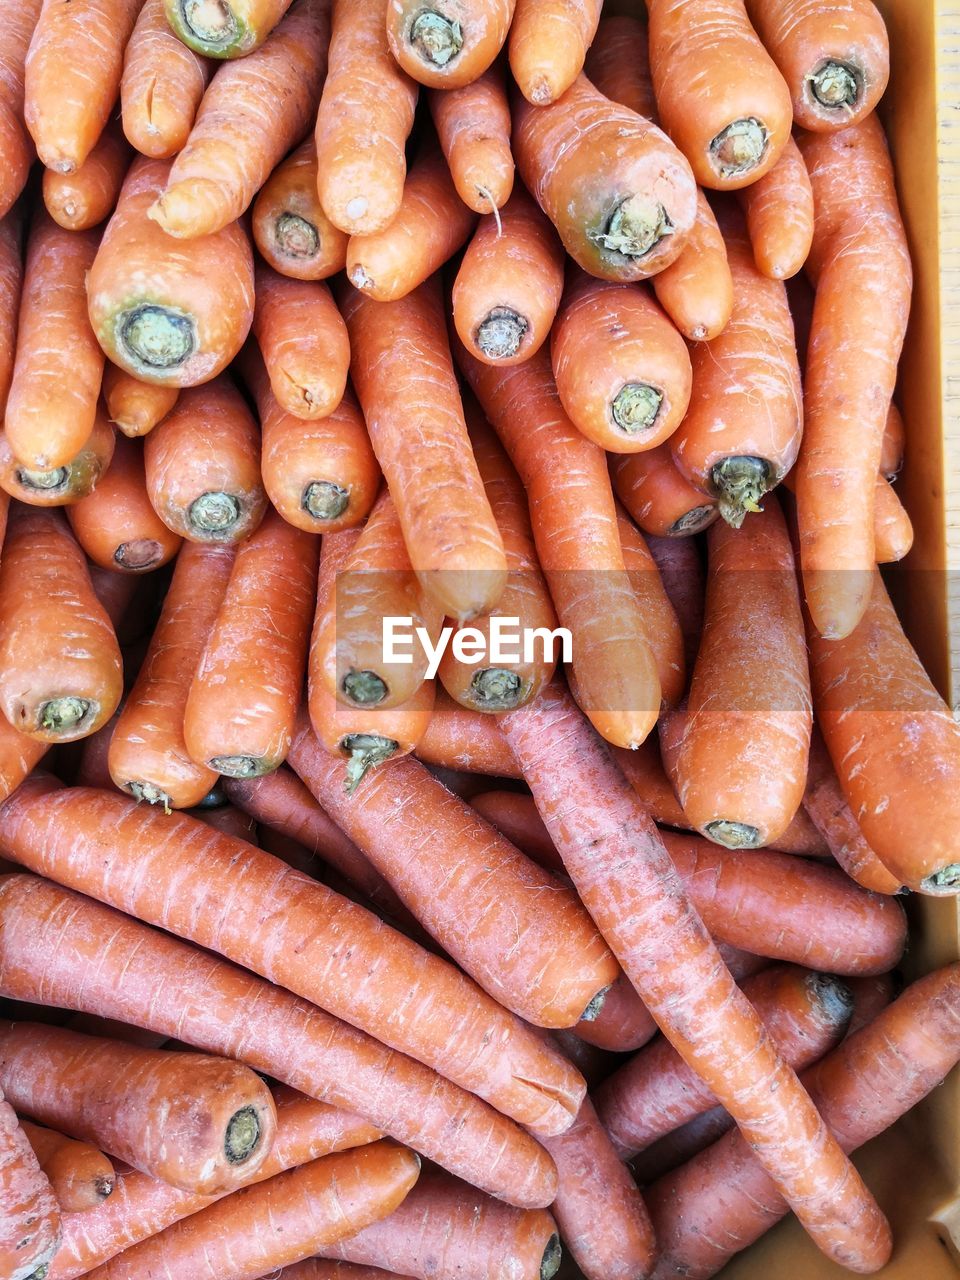 carrot, food, food and drink, healthy eating, vegetable, root vegetable, large group of objects, freshness, wellbeing, produce, abundance, full frame, orange color, no people, market, backgrounds, day, high angle view, raw food, retail, for sale, close-up, market stall, outdoors